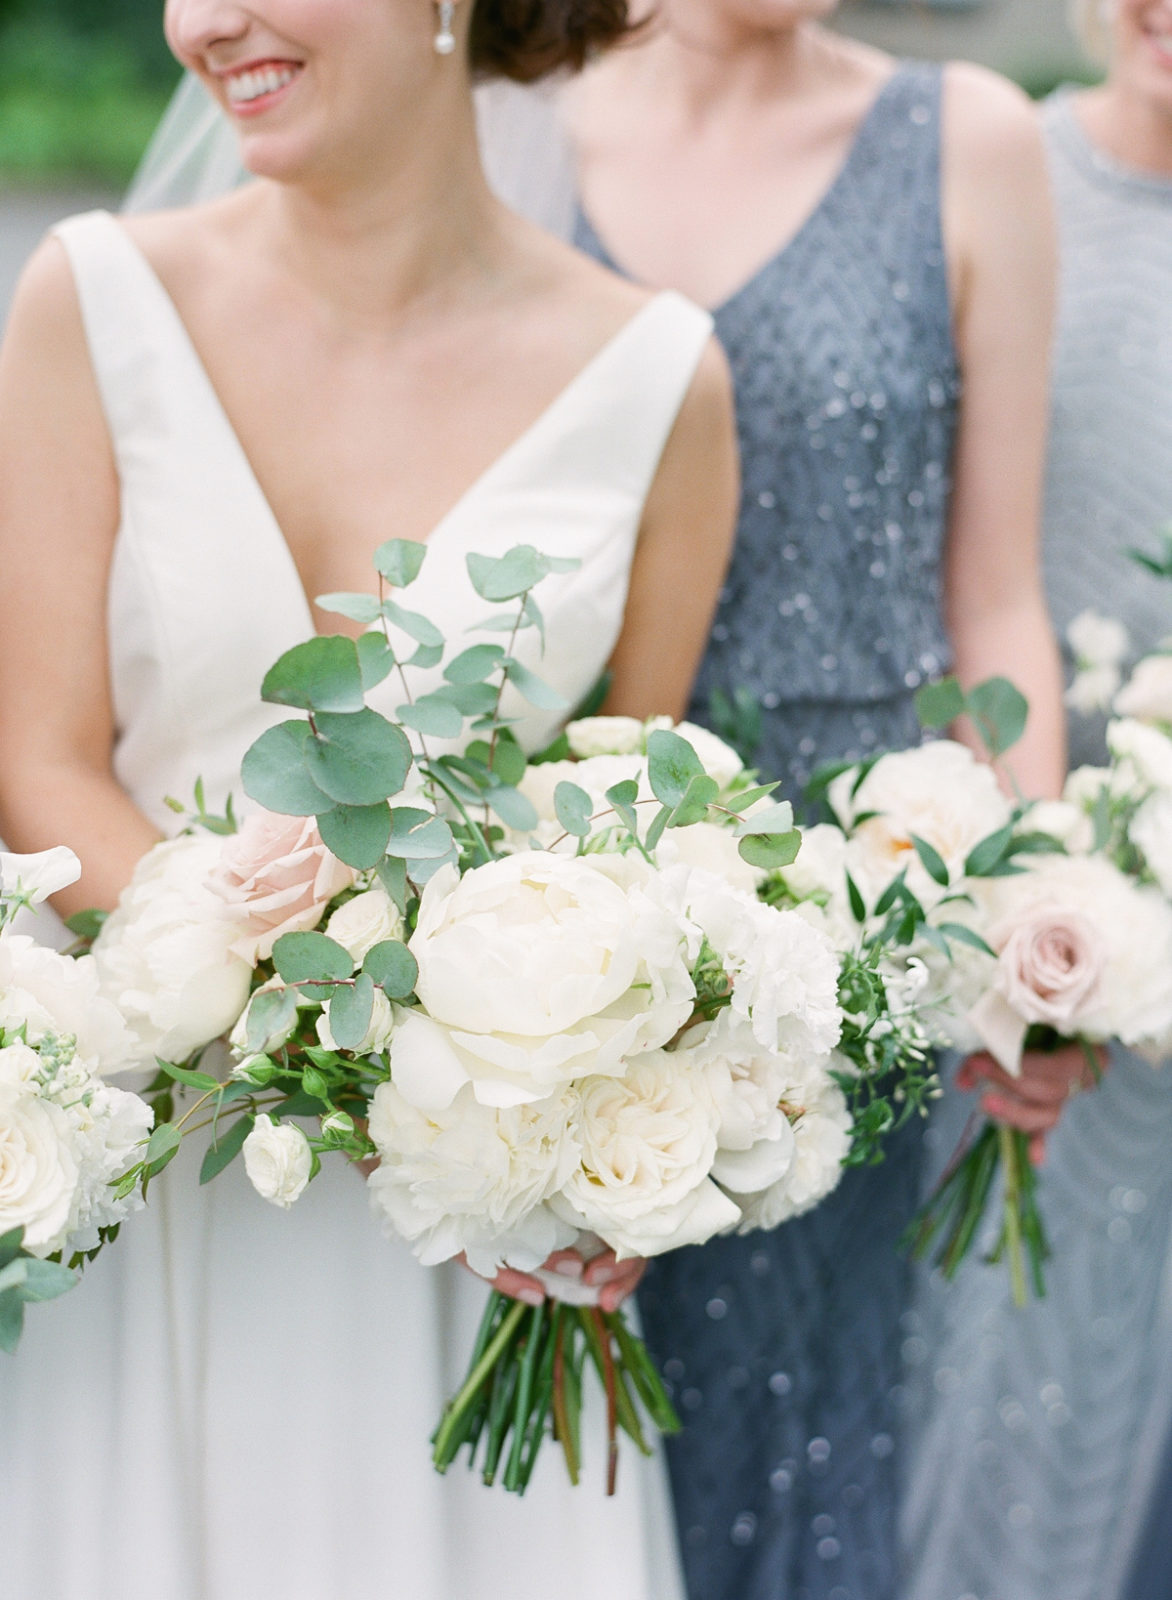 Ireland Film Photographer | Molly Carr Photography | Bride in White Jenny Yoo Dress and Bridesmaids in Grey Mismatched Bhldn Gowns with White Bridal Bouquets